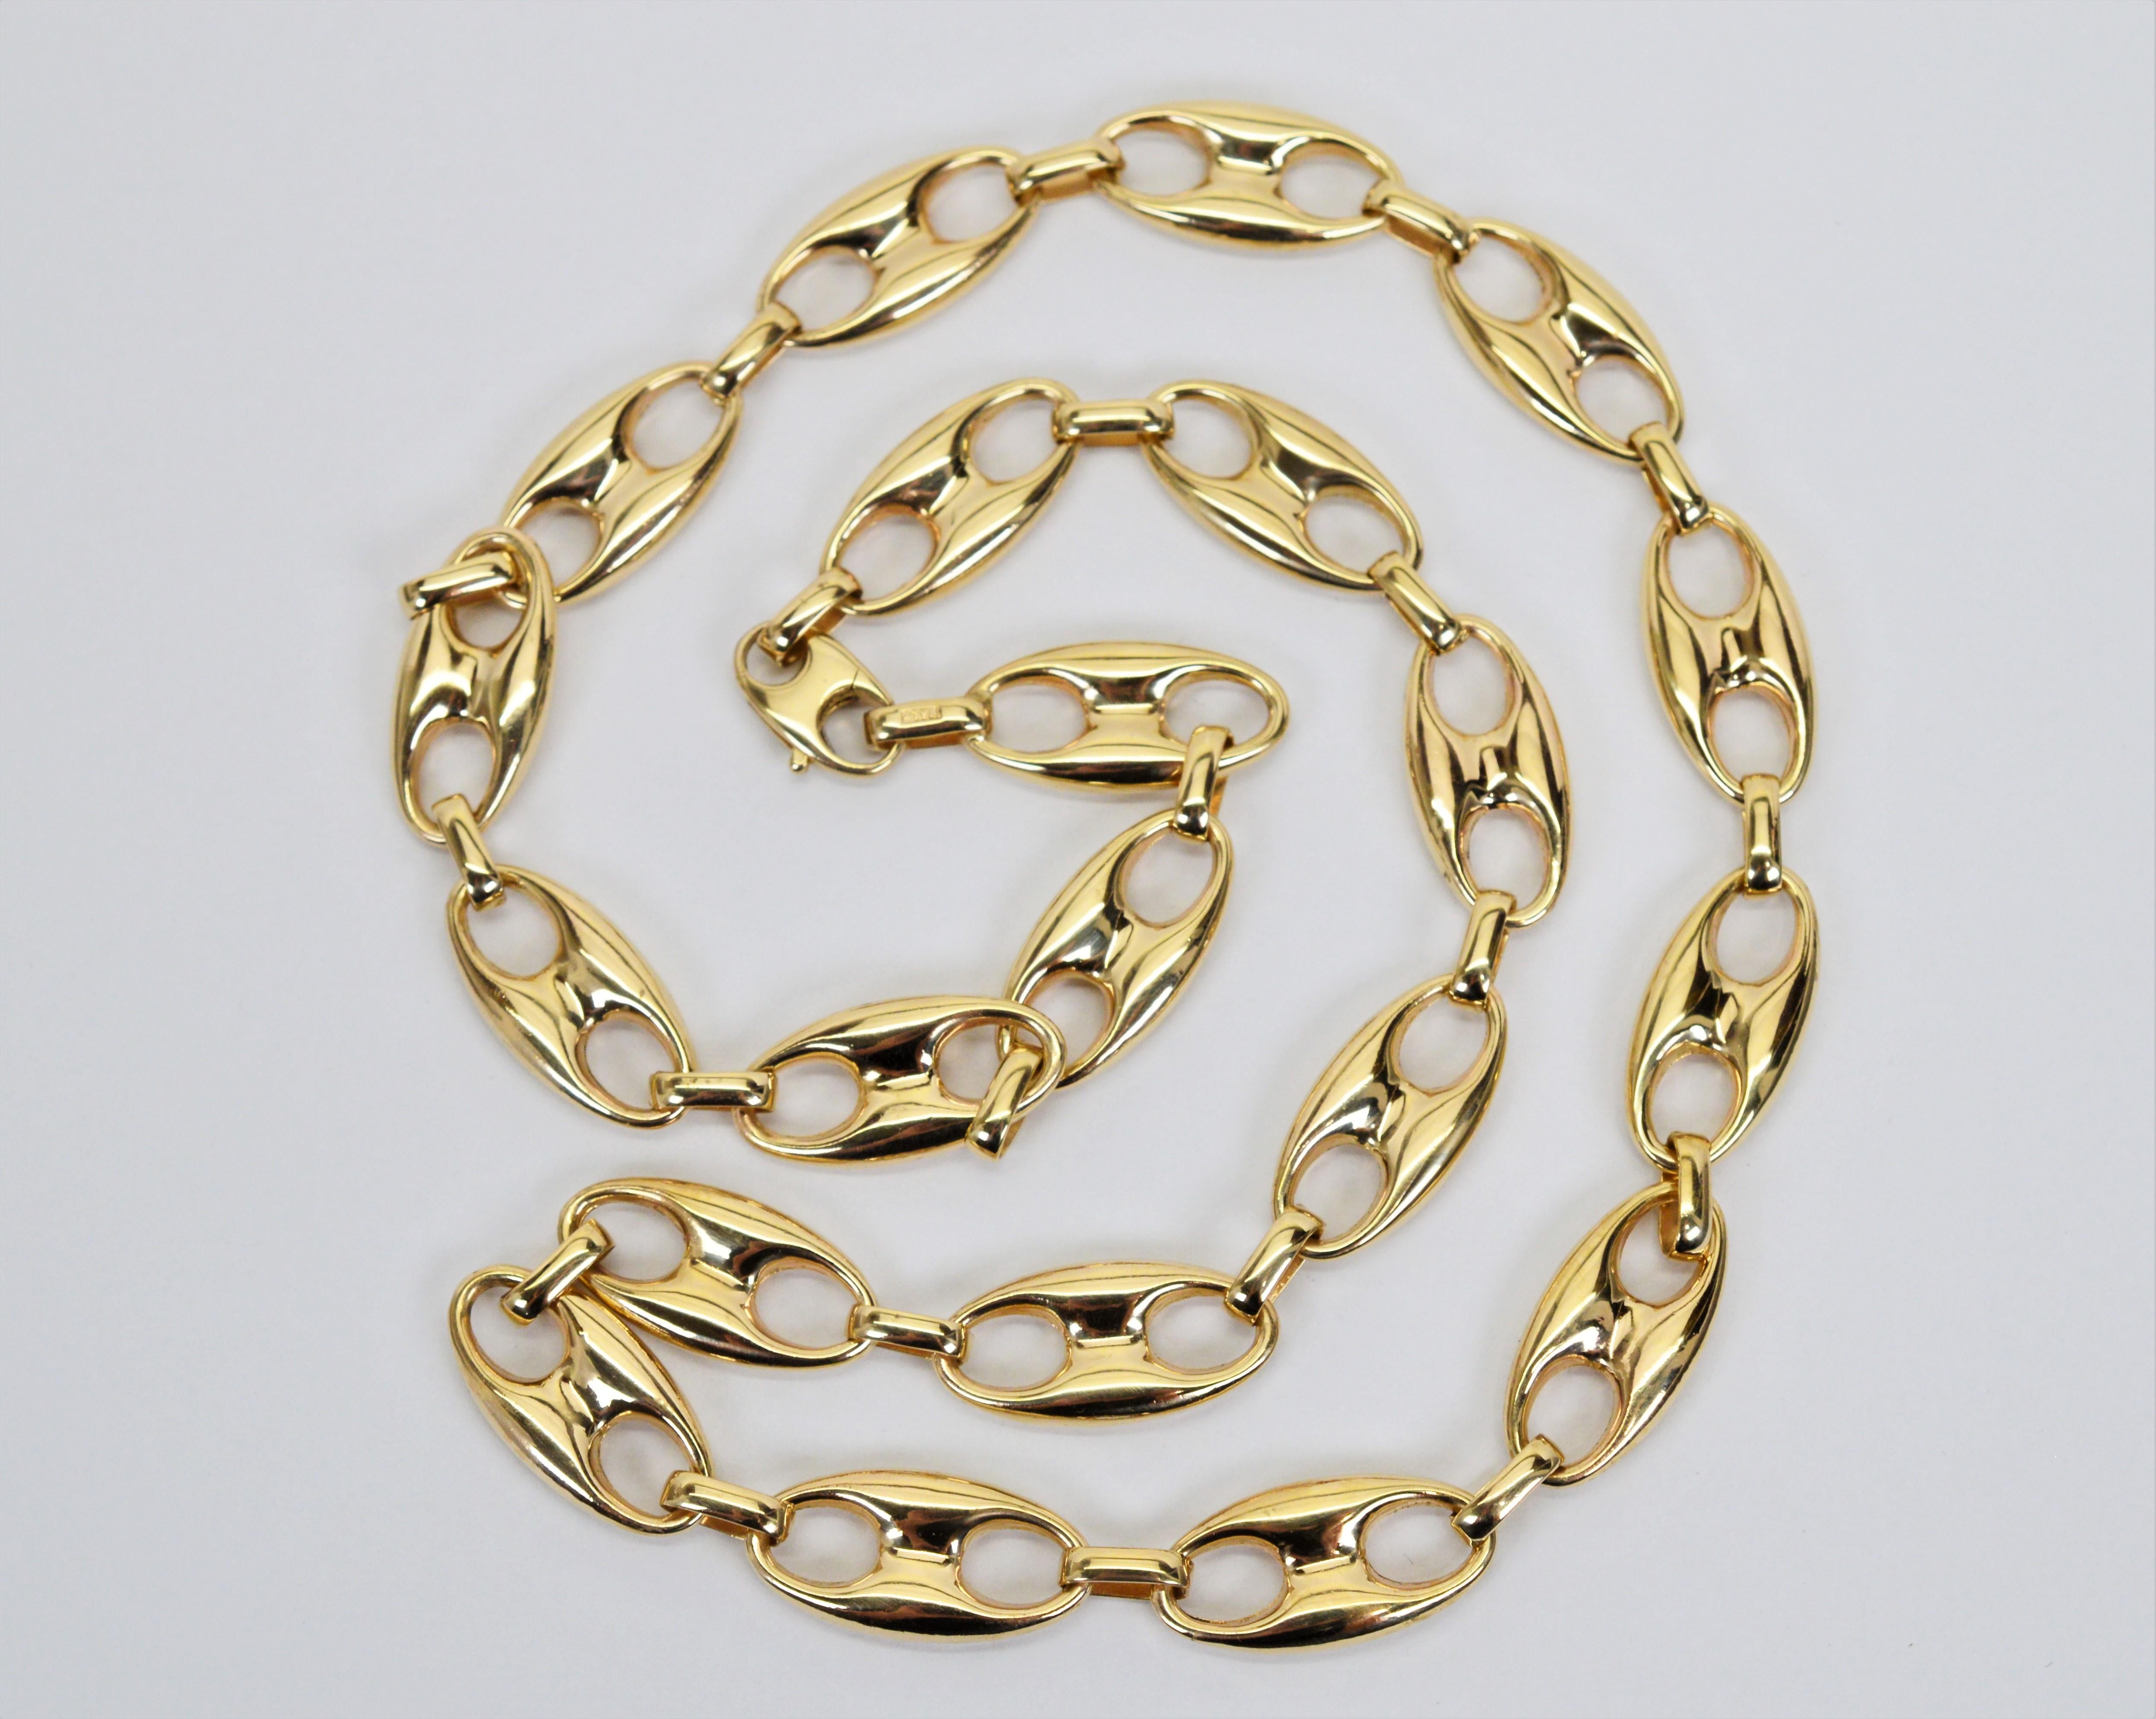 2 pennyweight gold chain